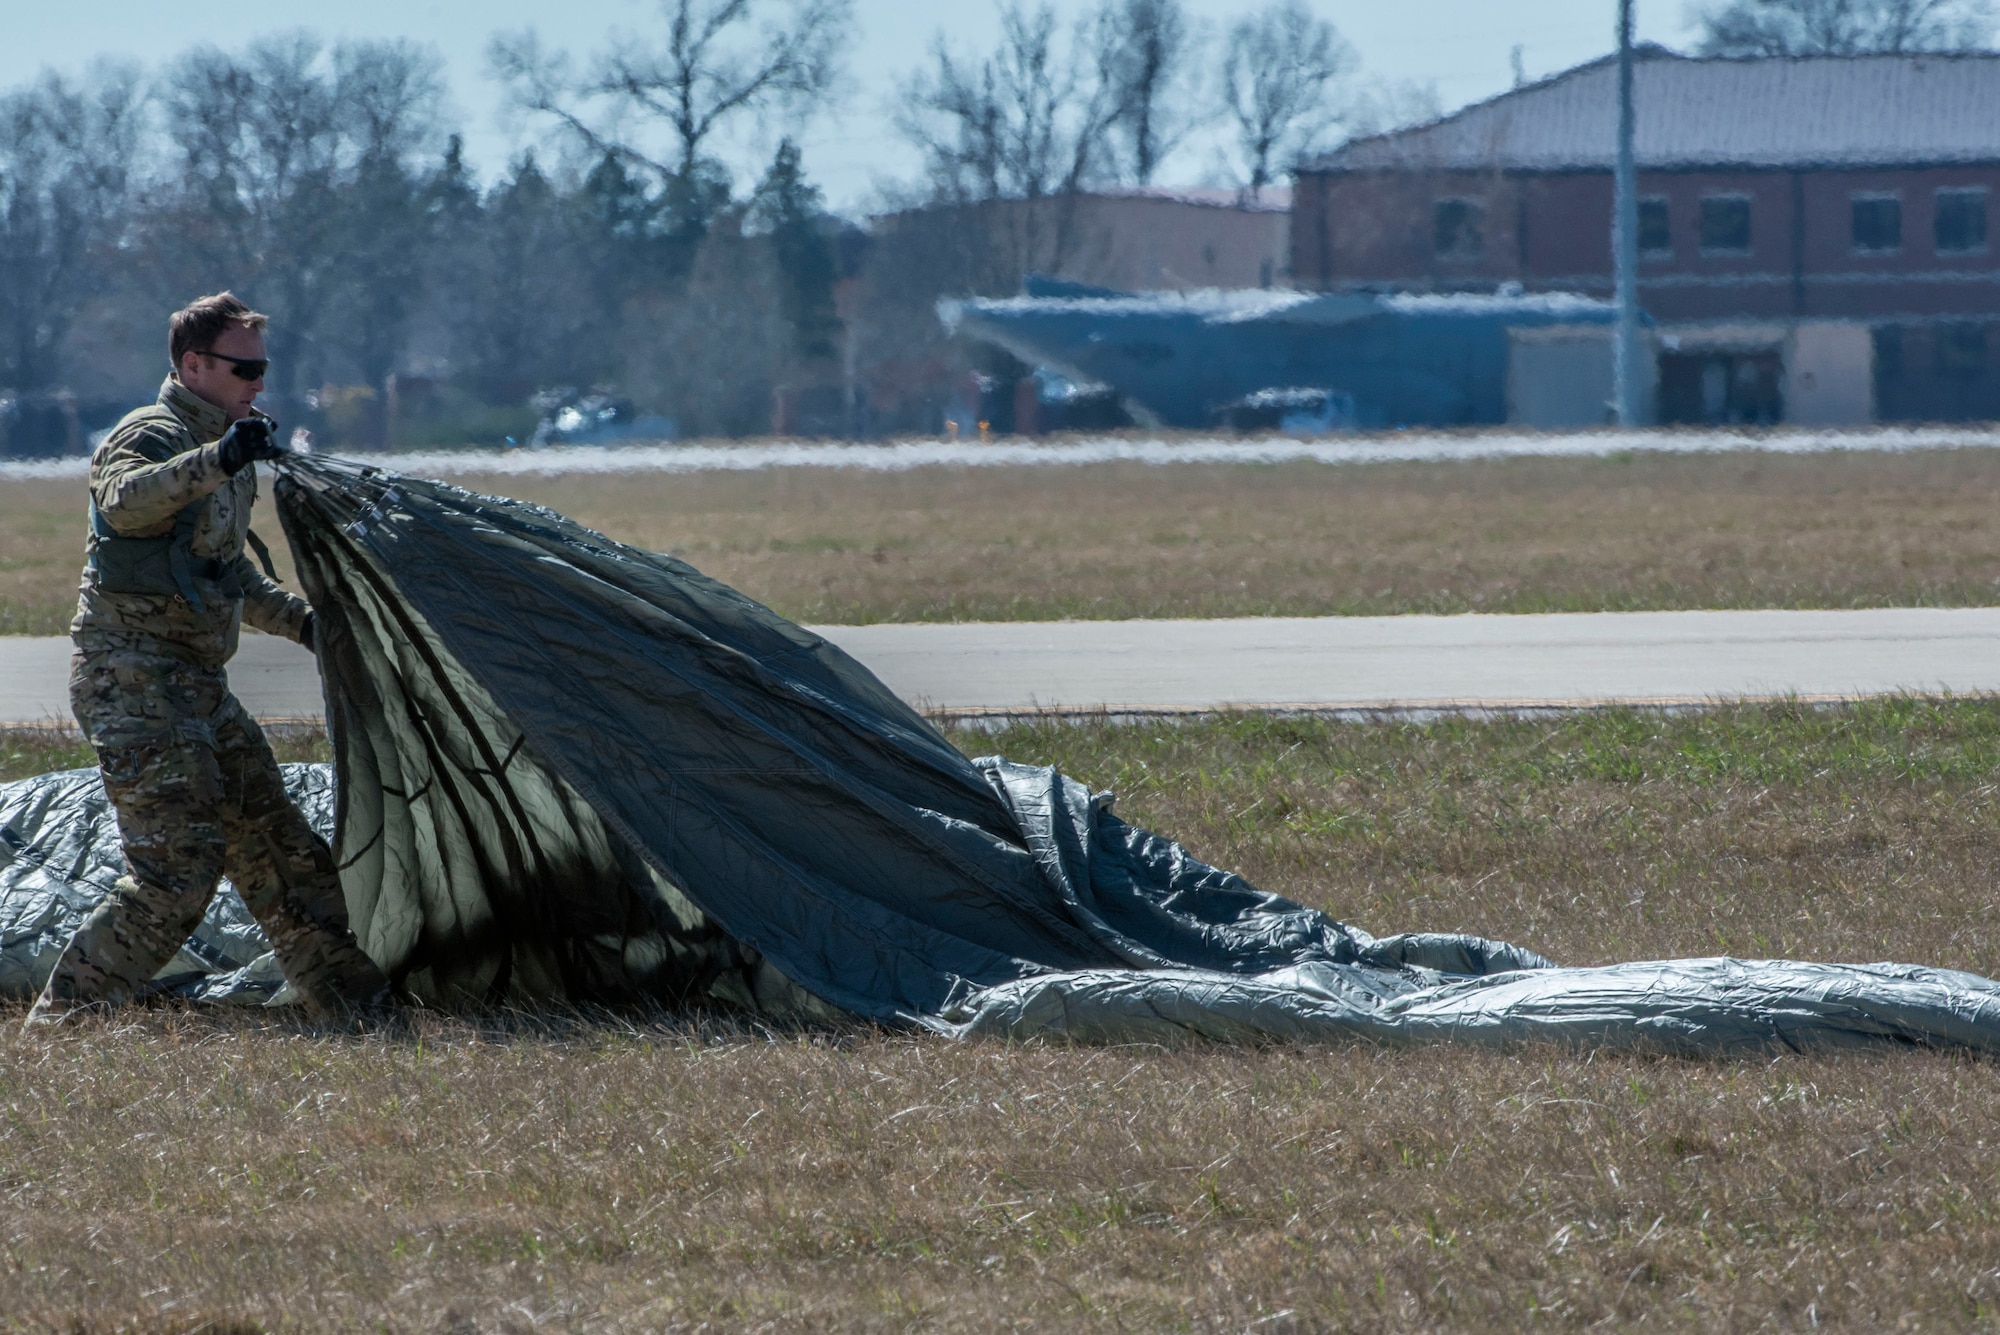 Tech. Sgt. Kyle Oler, 375th Operations Support Squadron's Survival, Evasion, Resistance, and Escape non commissioned officer in charge, gathers his parachute after performing a static jump on March 2, 2017 at Scott AFB, Illinois. Scott AFB hosted this jump to streamline its capabilities and jump program while offering jumpers an opportunity to get required jumps accomplished as they face weather challenges elsewhere. The 375th OSS created the drop zone to increase the readiness of units in and around Scott AFB and for use by flying or ground units with an interest and the requirements. (U.S. Air Force photos/Senior Airman Tristin English)